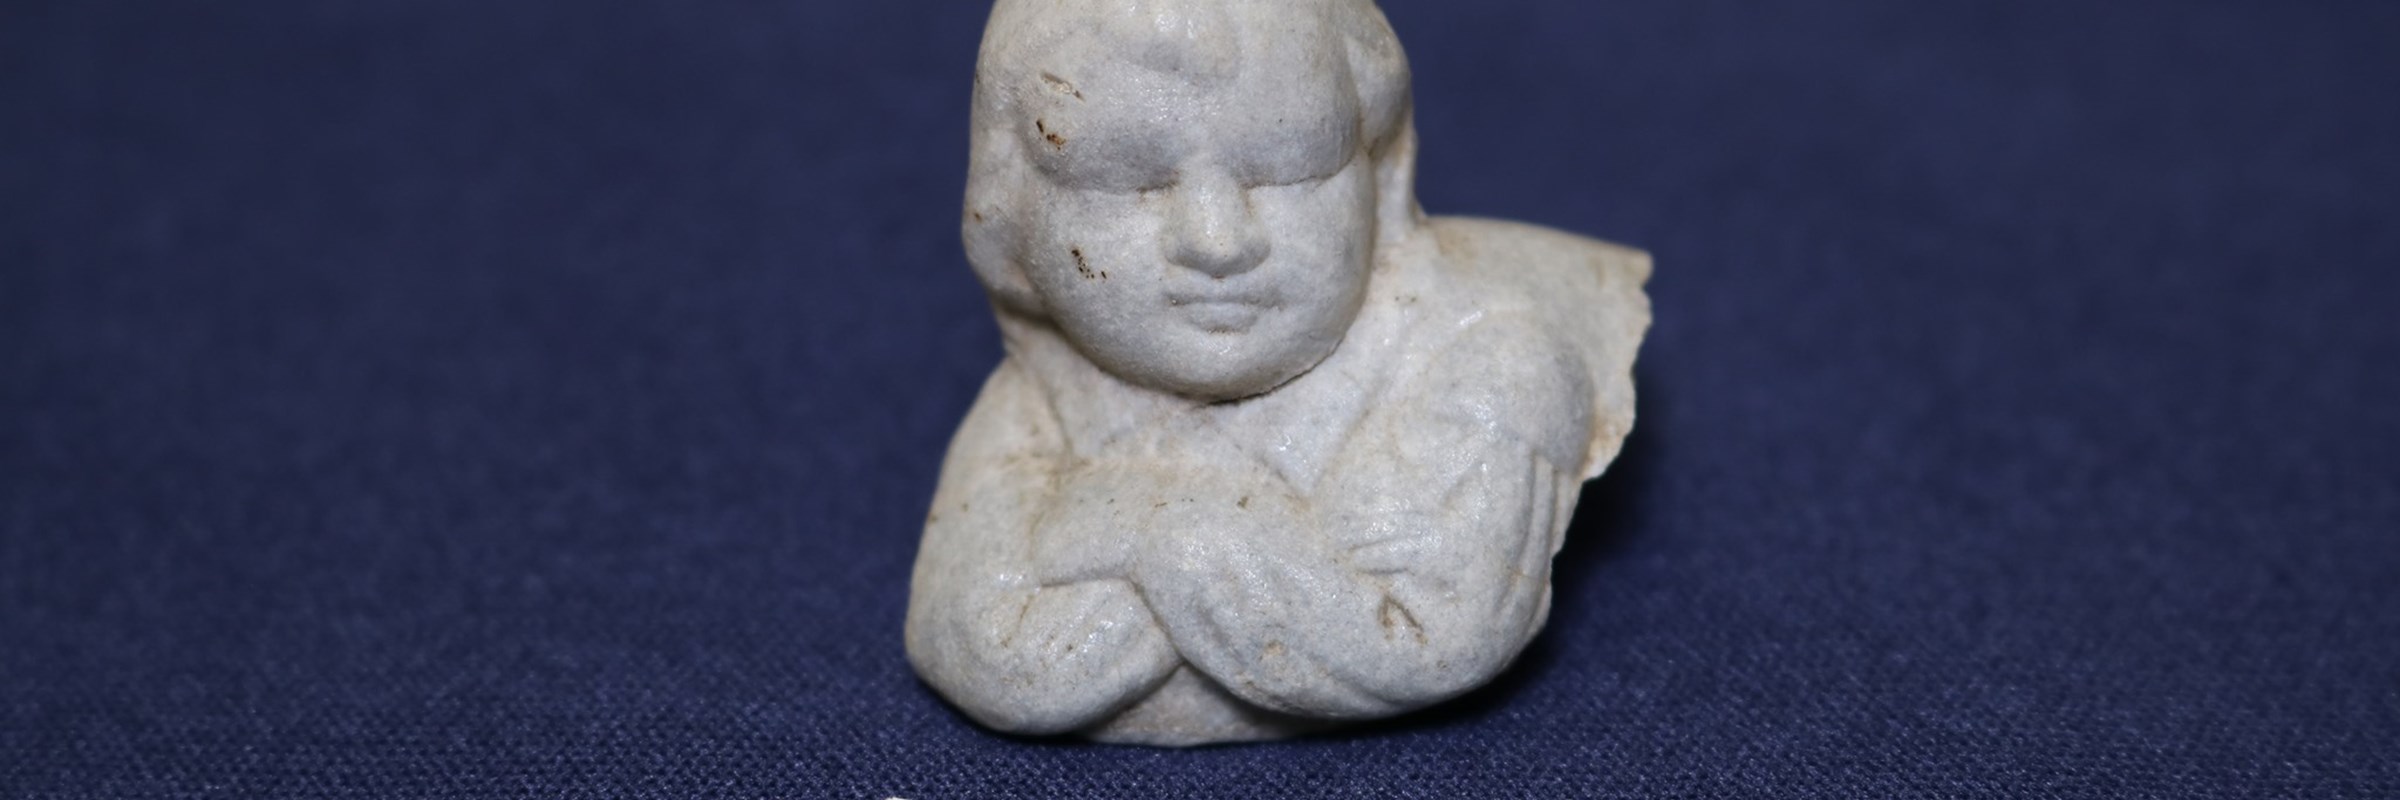 Small Parian Porcelain Bust from the Ohio/Nine Gal Tavern